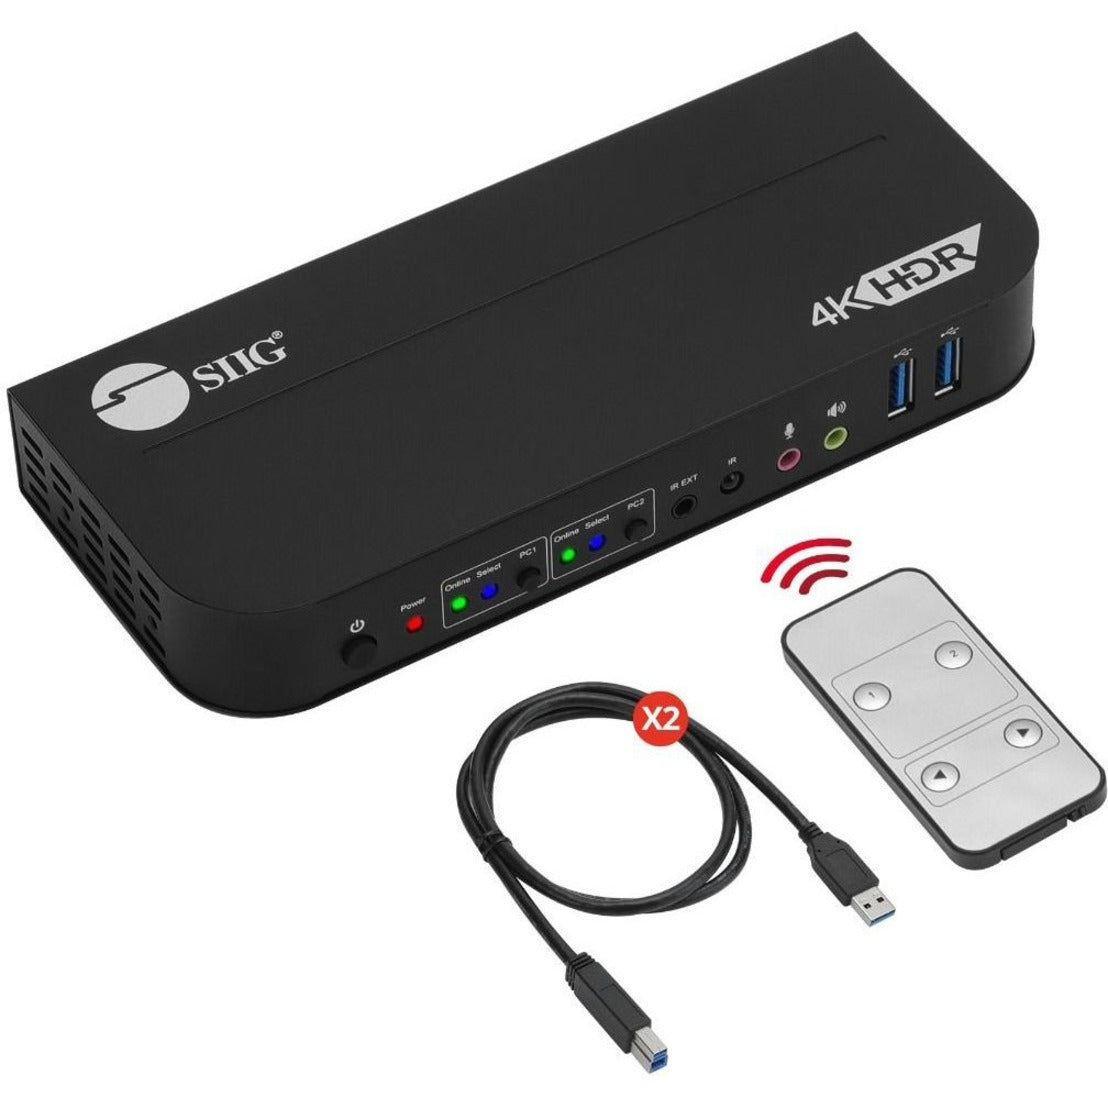 SIIG CE-KV0E11-S1 2x1 HDMI 4K HDR KVM USB 3.0 Switch with Remote Control Plug and Play